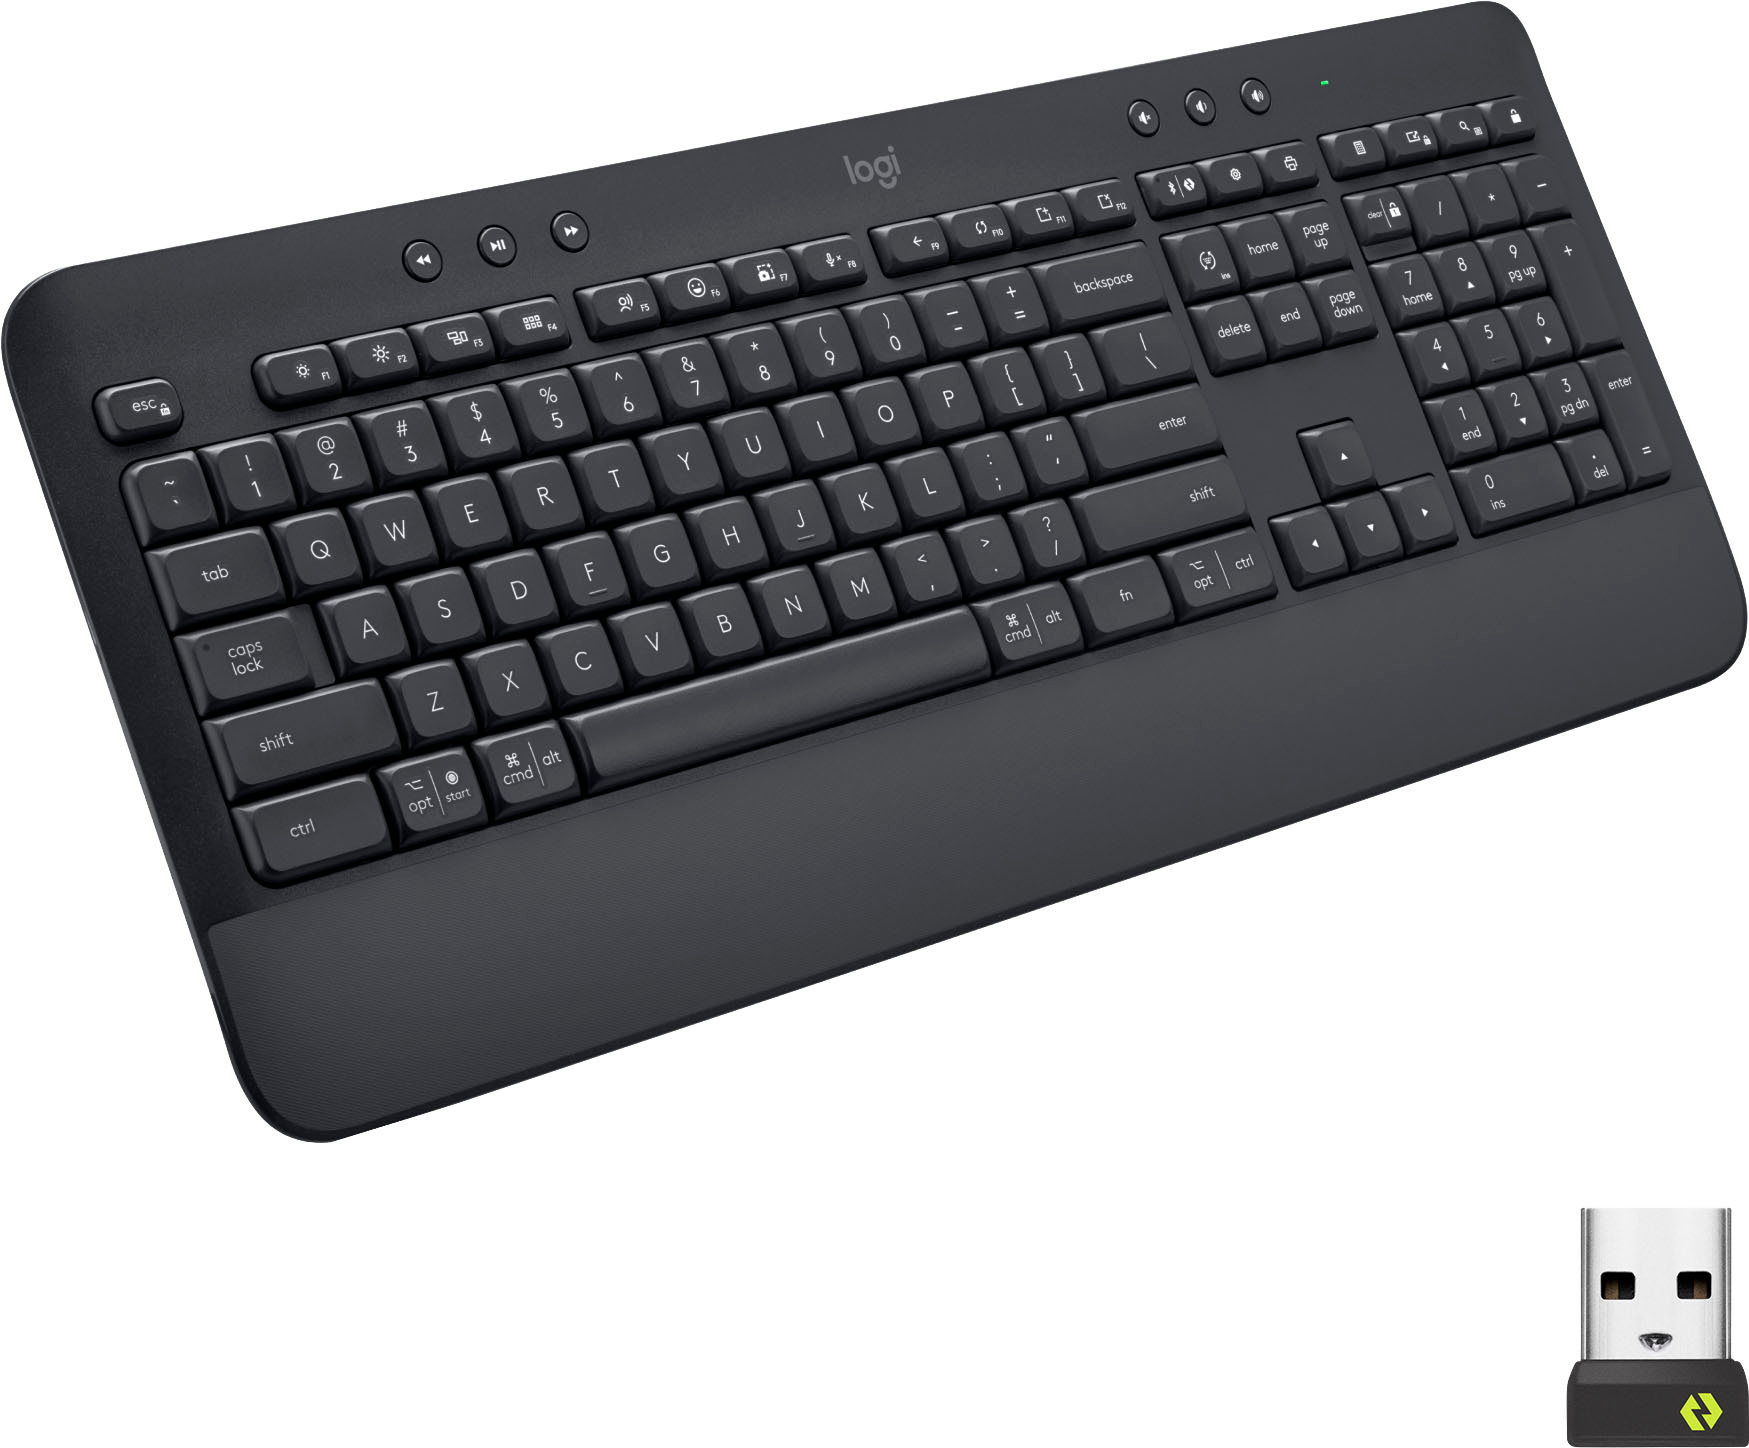 Logitech Signature K650 Full-Size Wireless Keyboard for with Wrist Rest Graphite - Best Buy